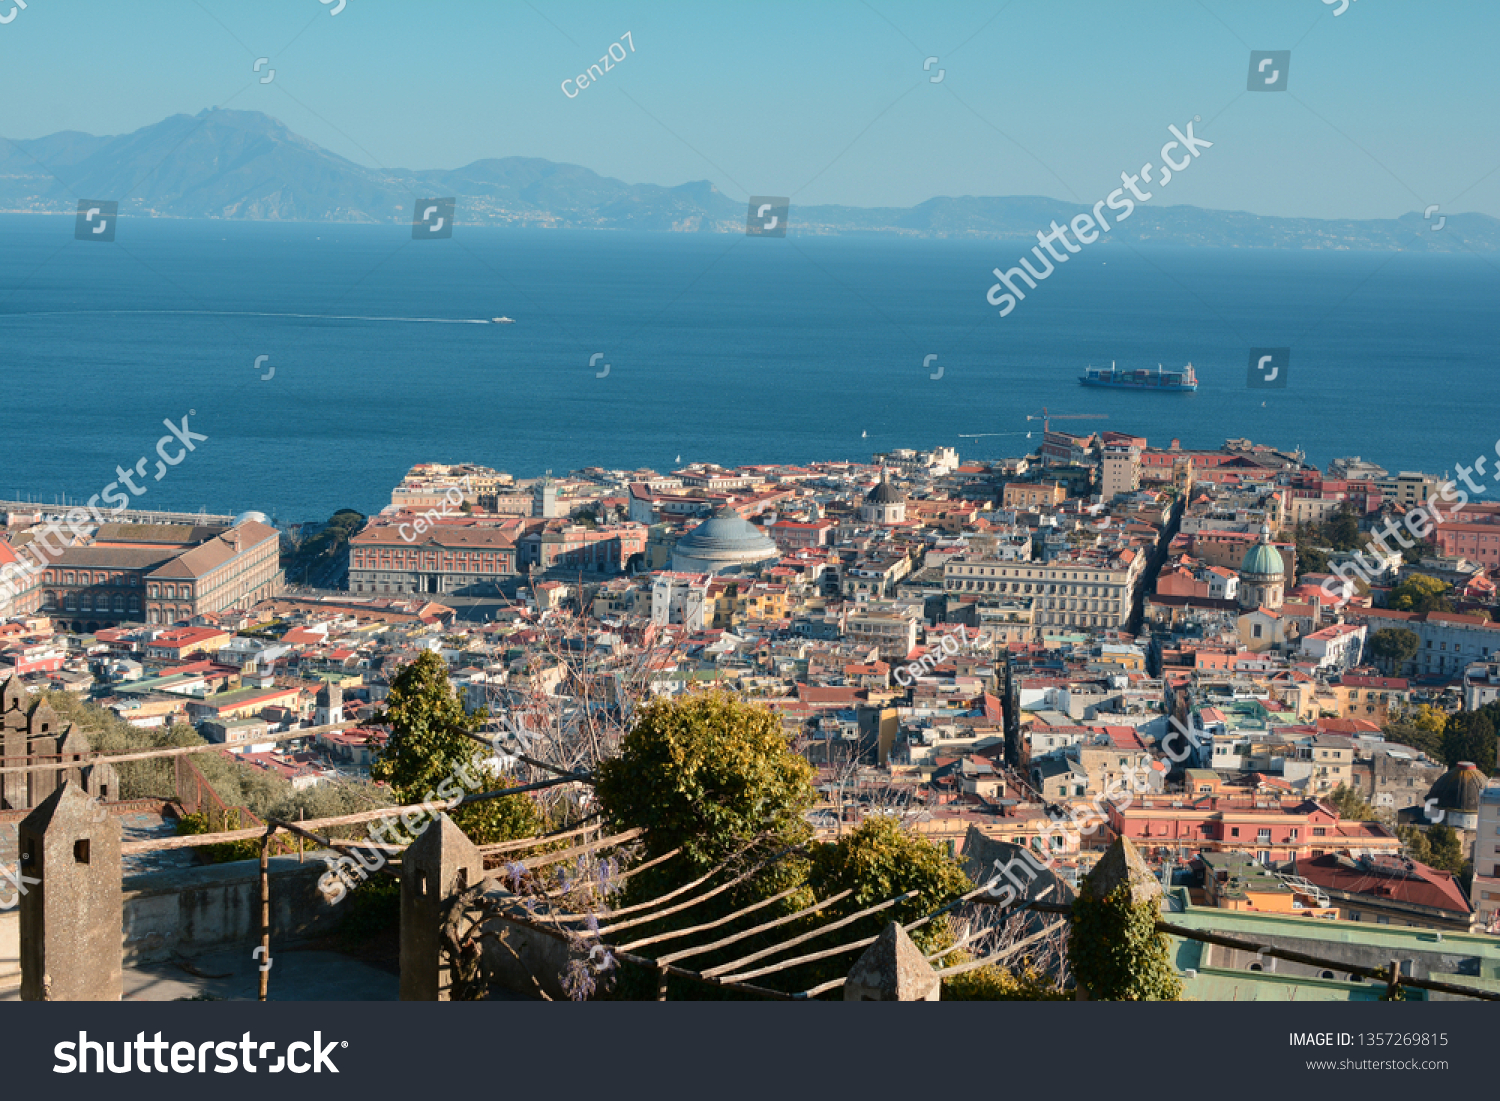 Panoramic view of the Gulf of Naples, Italy #1357269815